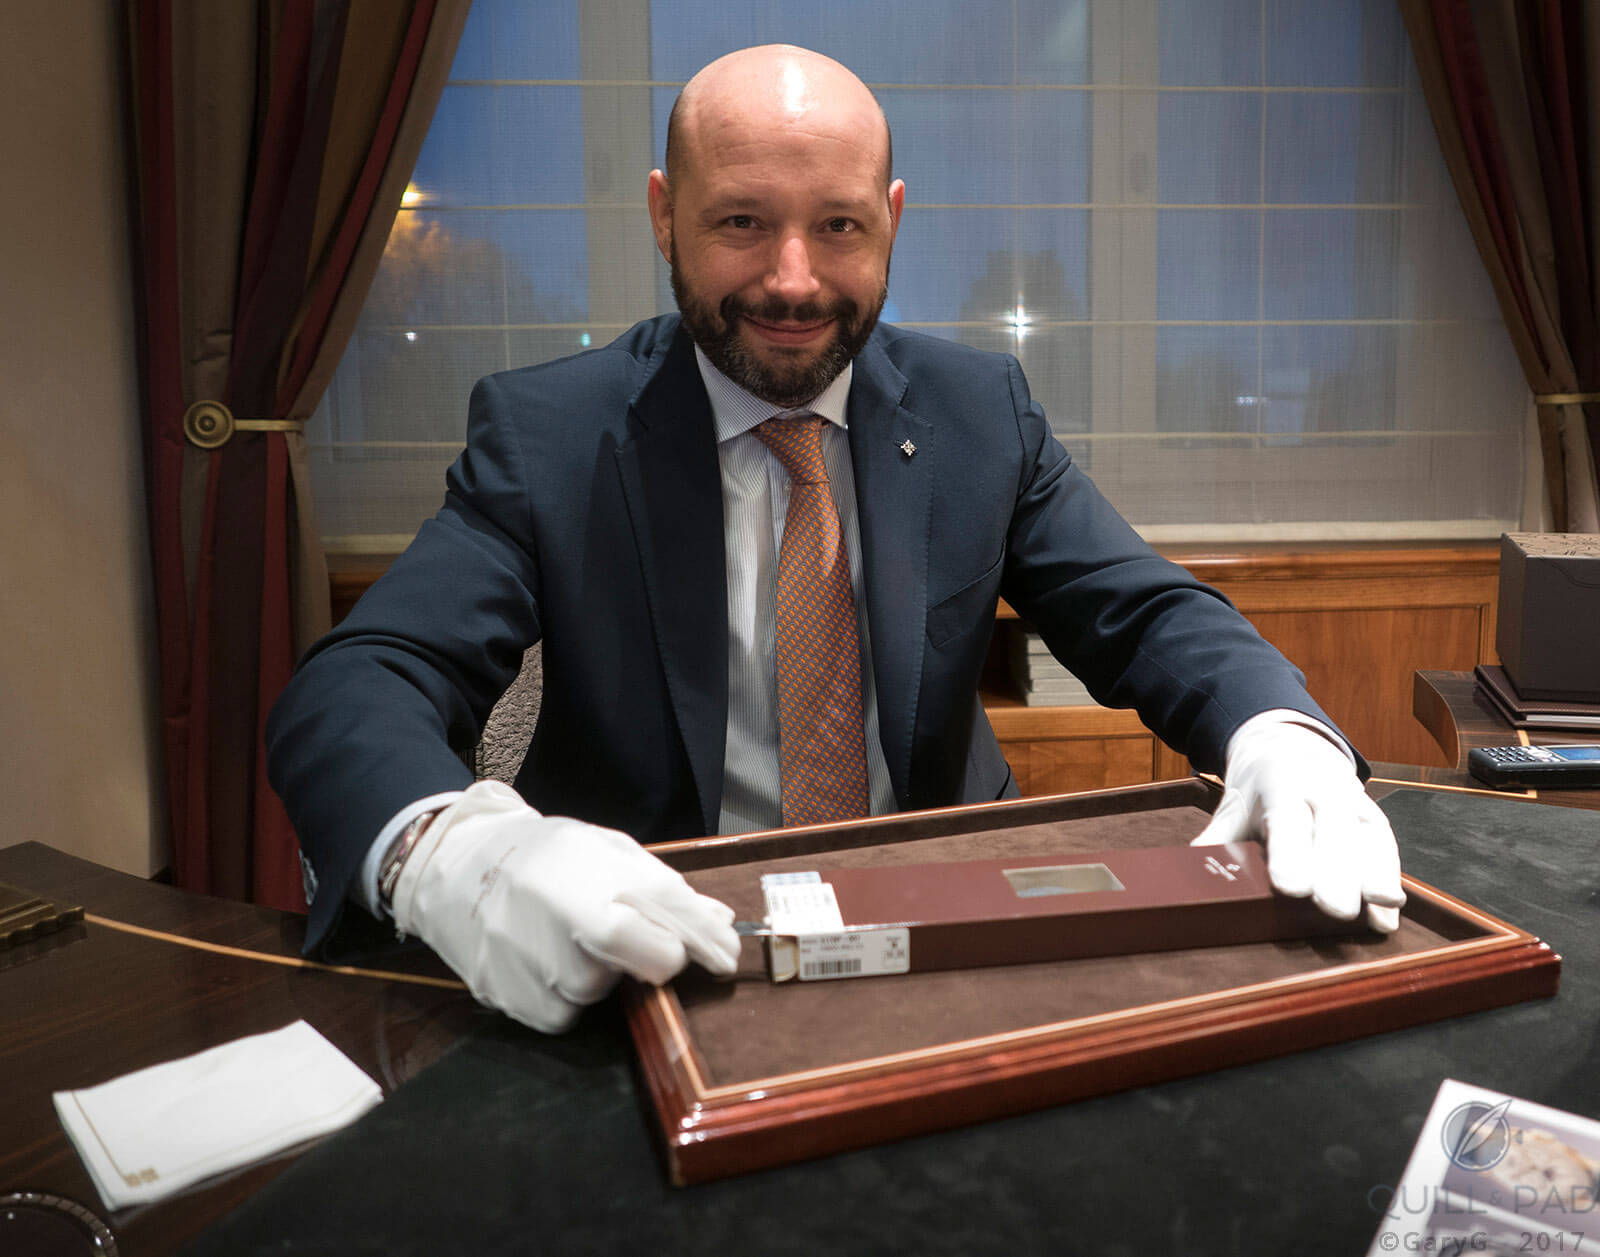 Moment of truth: breaking the seal for a new delivery at the Patek Philippe Geneva Salon